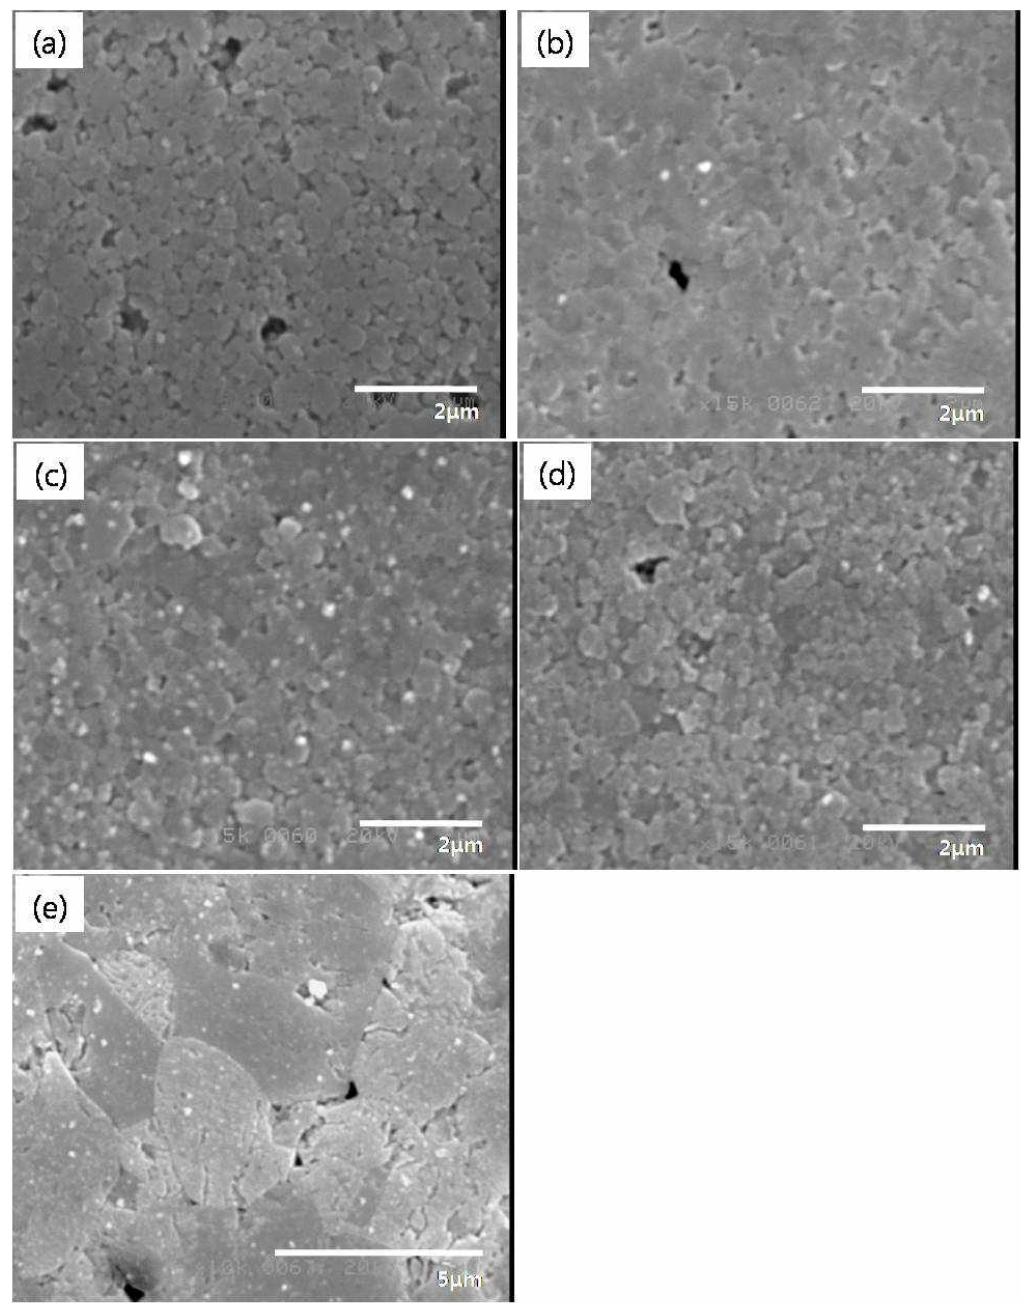 Microstructures of Ba(Ti0.965Re0.03Mn0.005)O3-δ system doped with : (a)Yb, (b)Er, (c)Y, (d)Ho and (e)Dy.